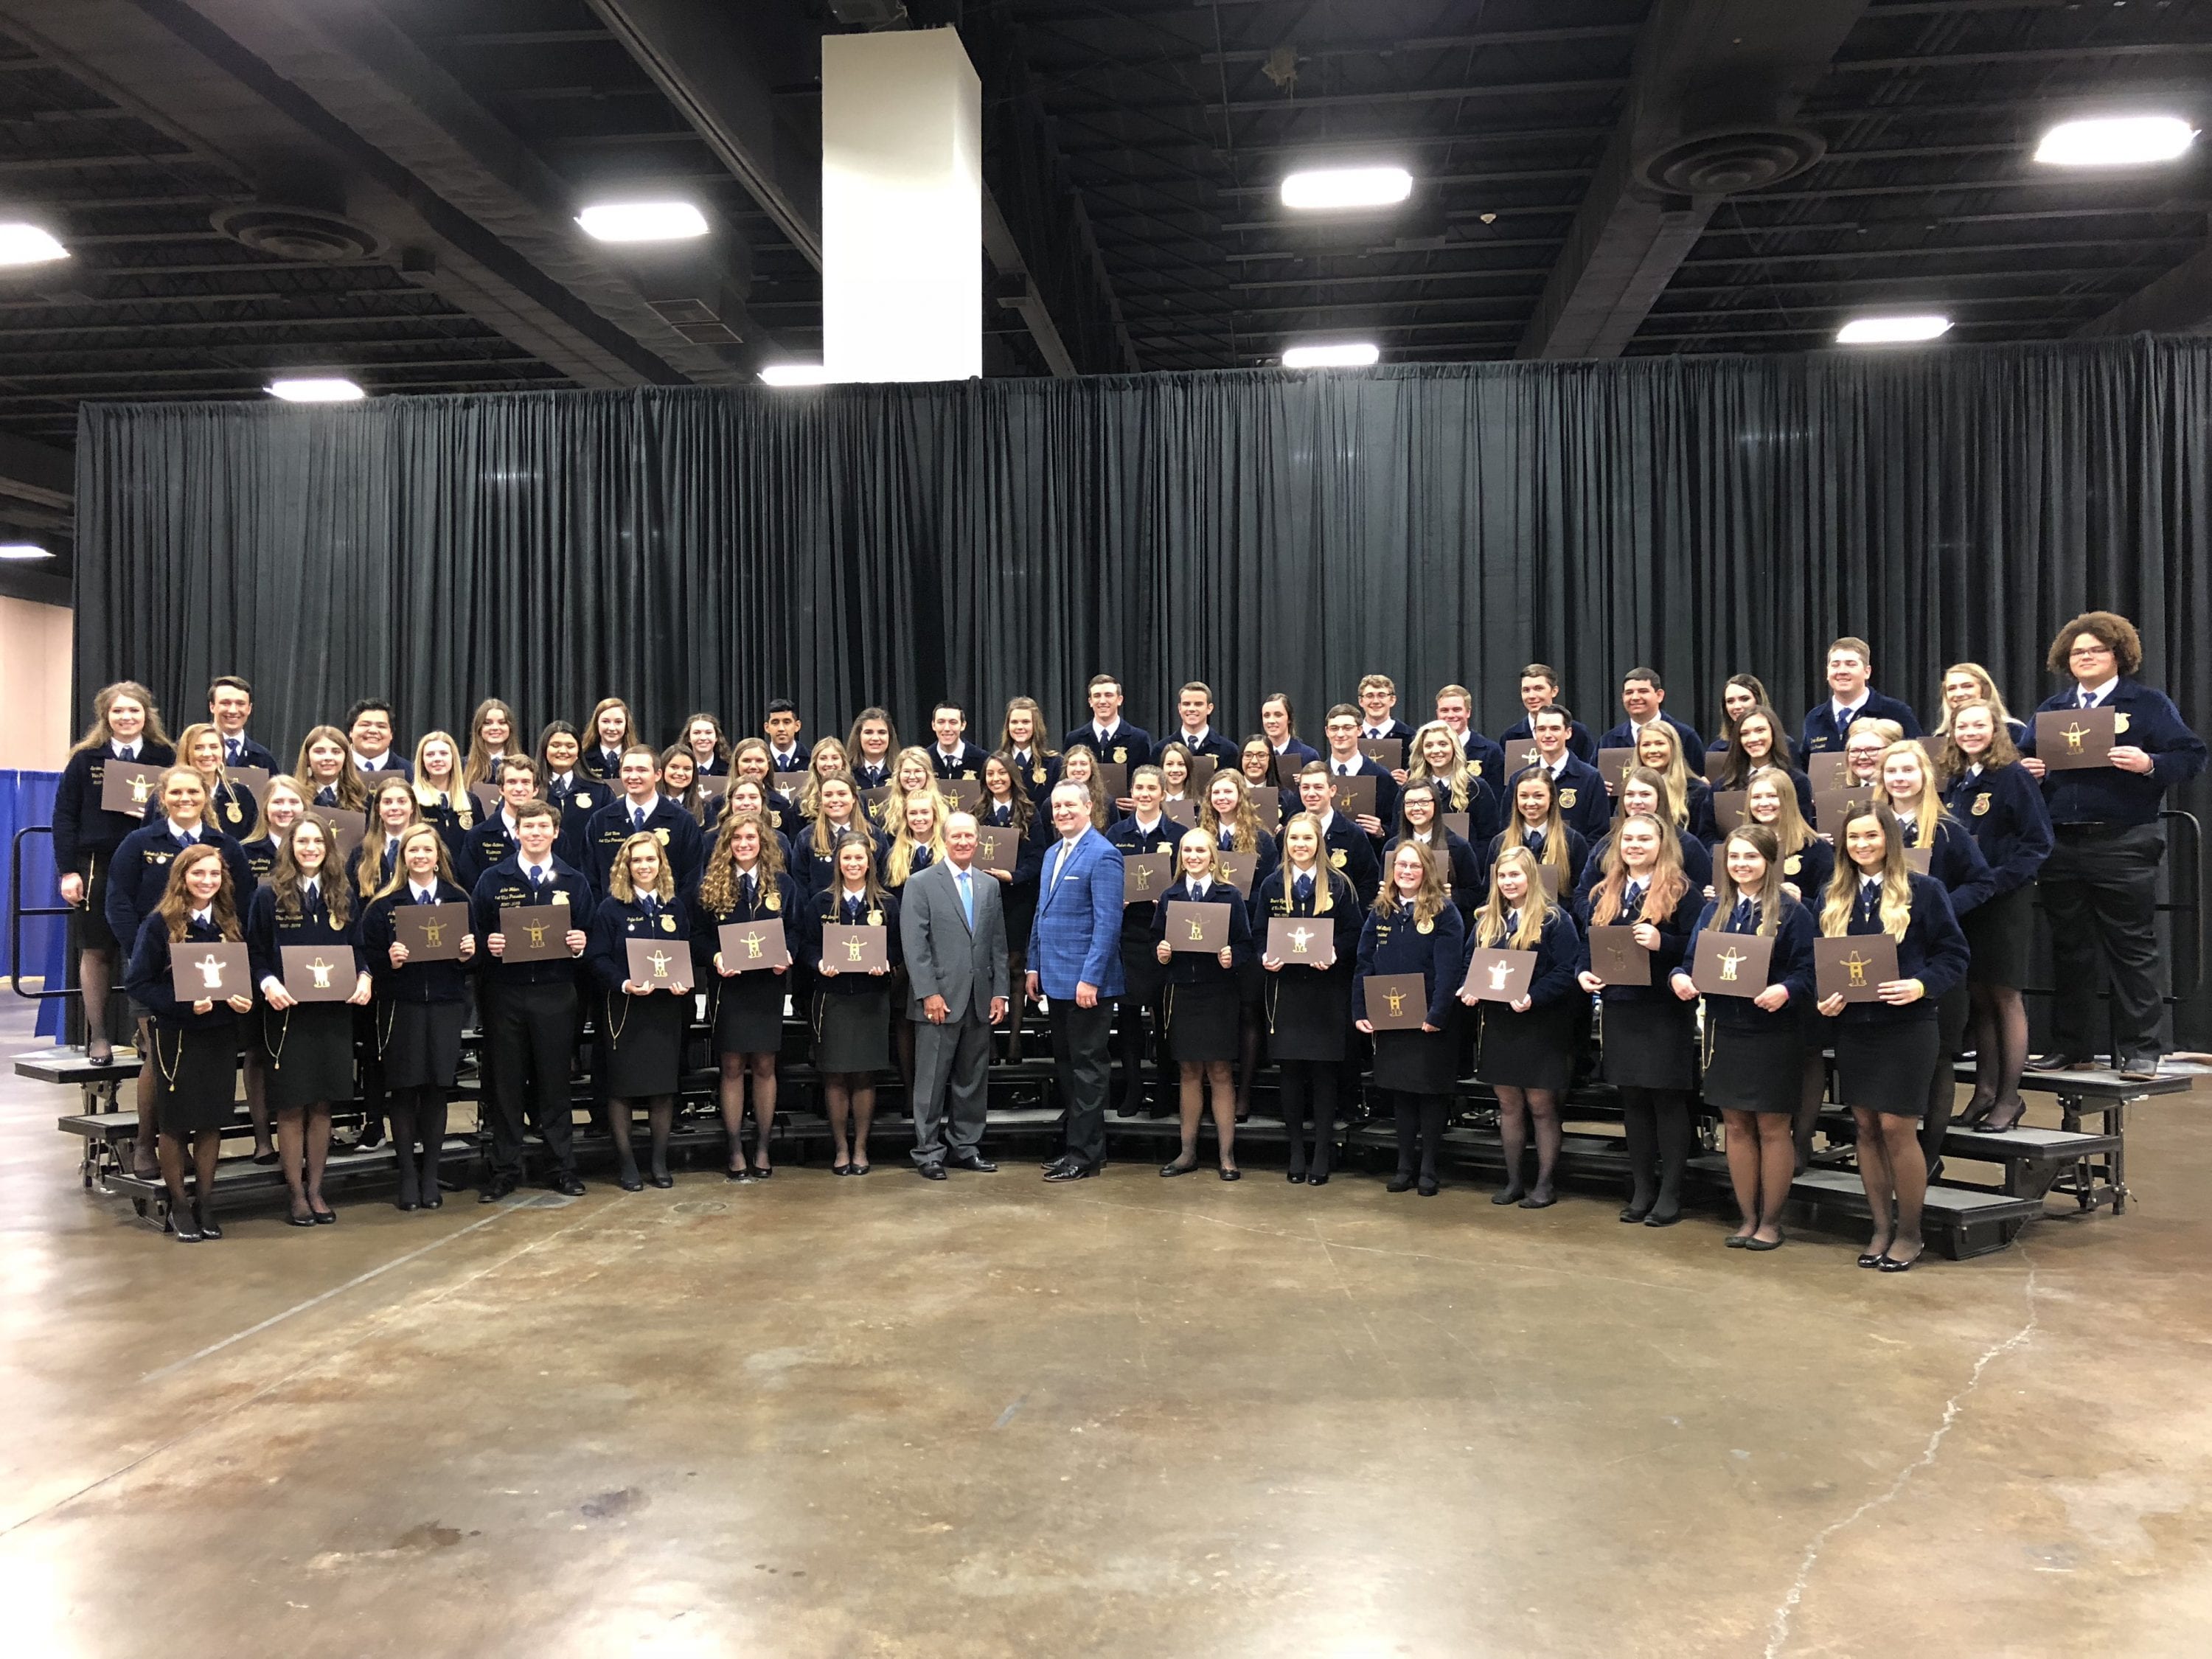 HOUSTON LIVESTOCK SHOW AND RODEO™ SCHOLARS PRESENTED WITH 1.4 MILLION